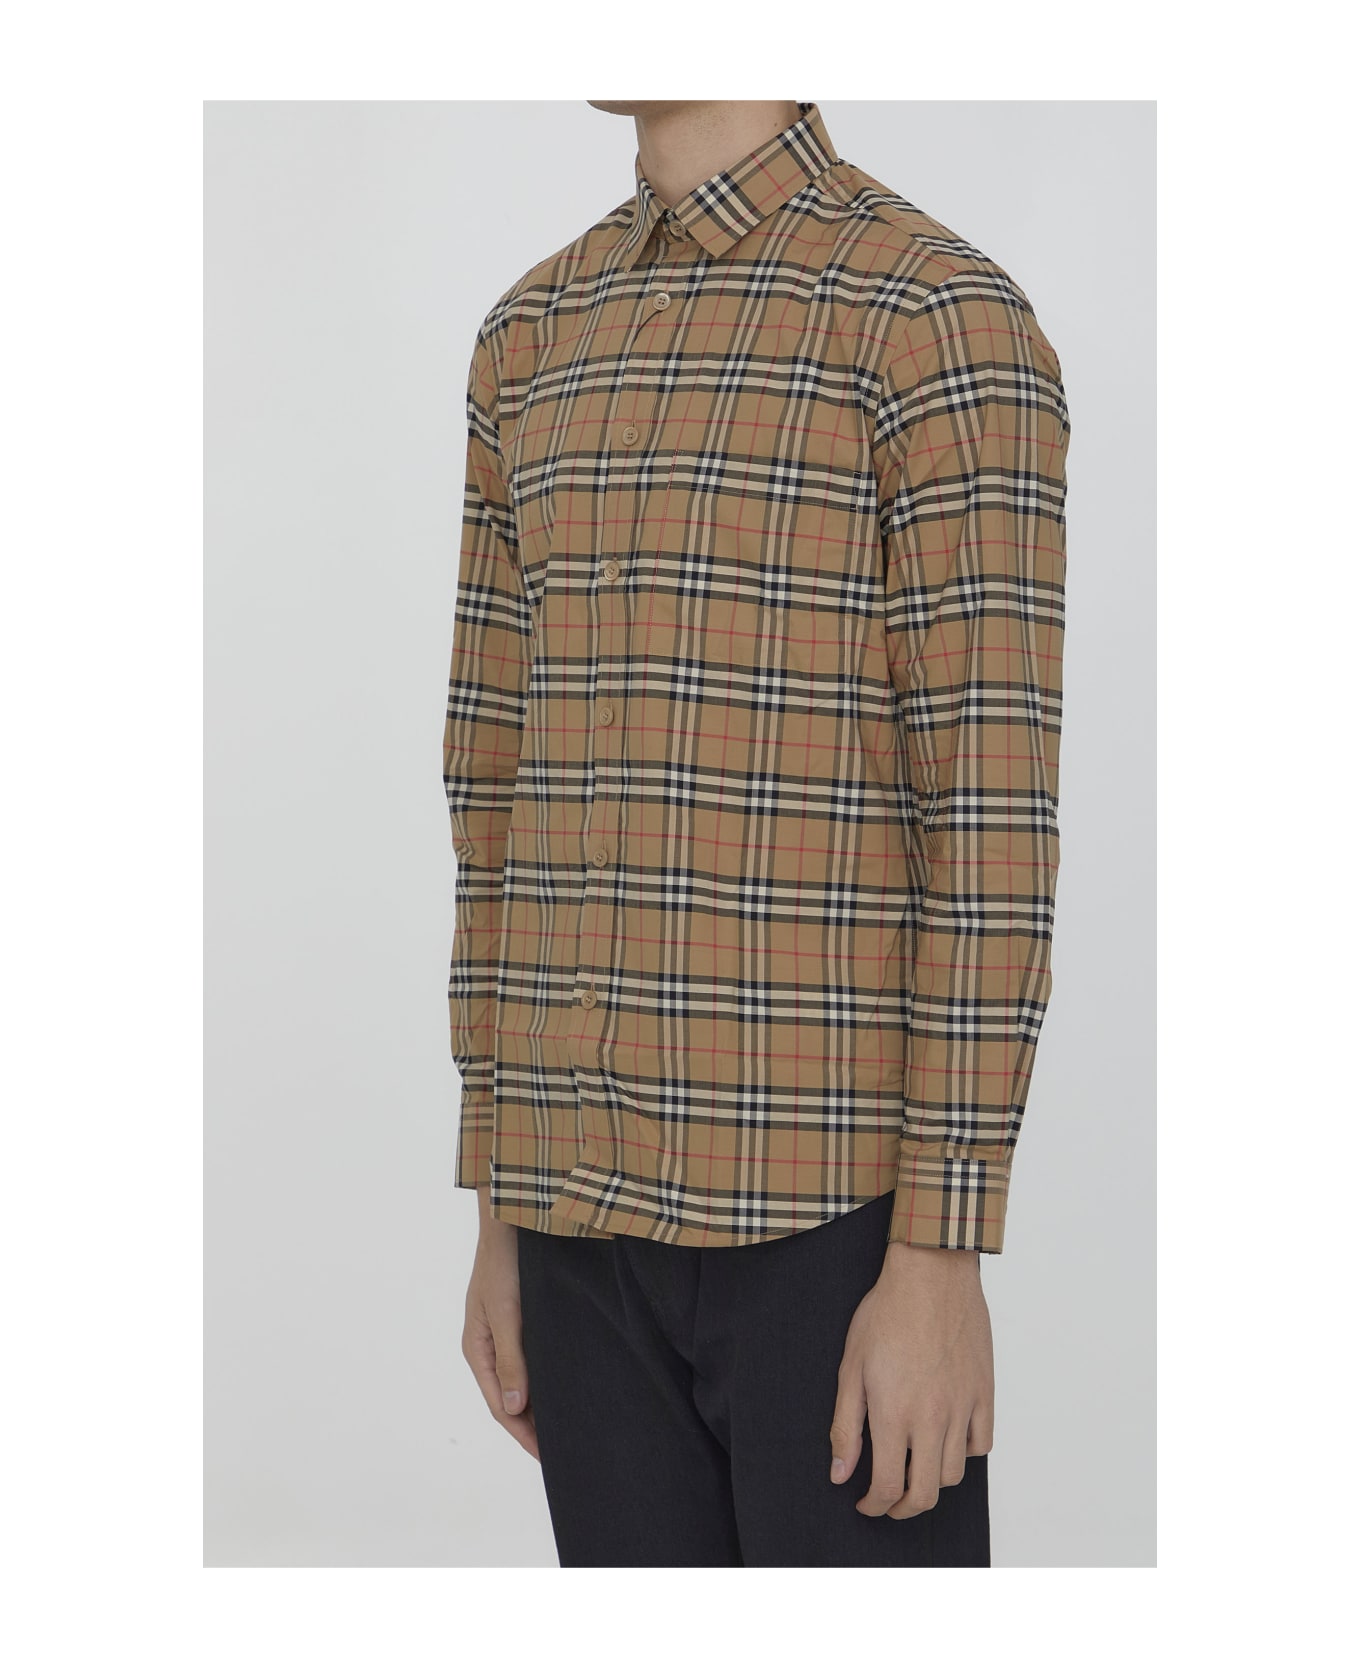 Burberry Small Check Shirt - BEIGE シャツ